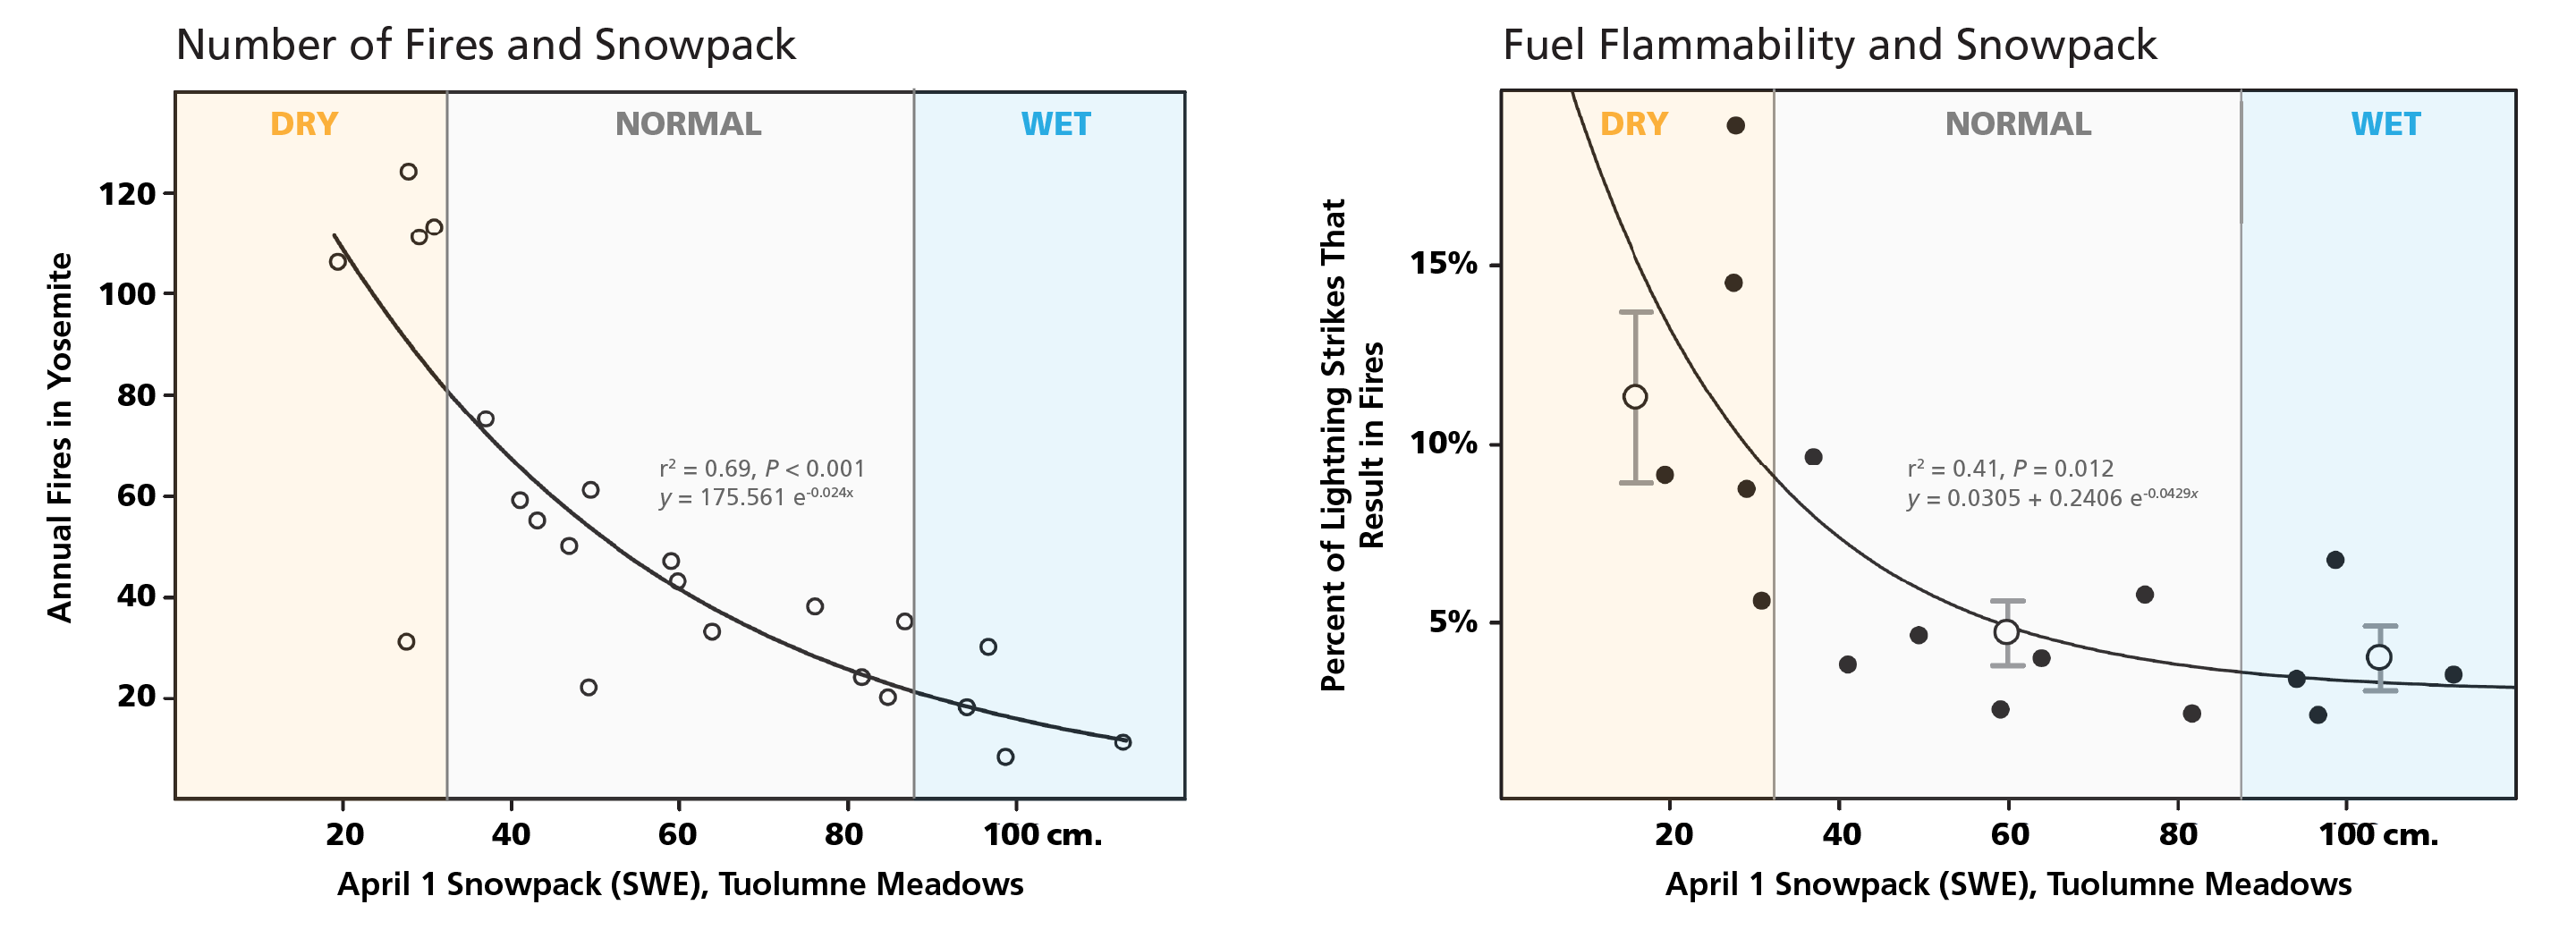 Two graphs show negative correlations between (1) annual fire number and snowpack and (2) fuel flammability and snowpack.